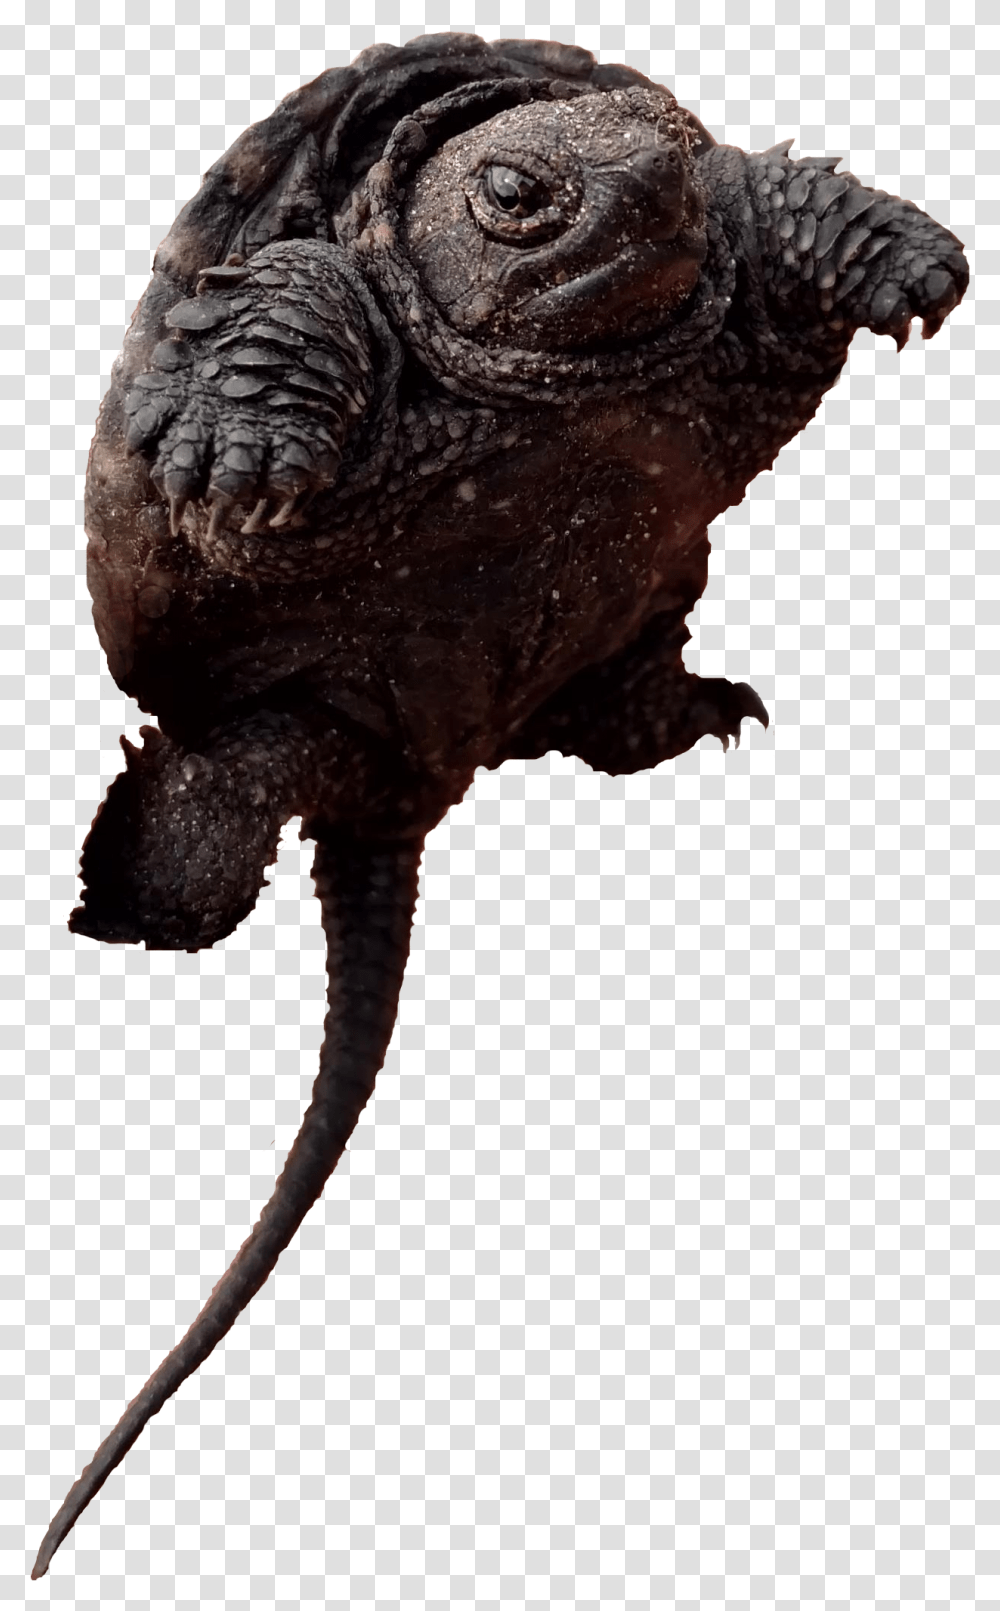 Toads Alligator Snapping Turtle, Dinosaur, Reptile, Animal, T-Rex Transparent Png